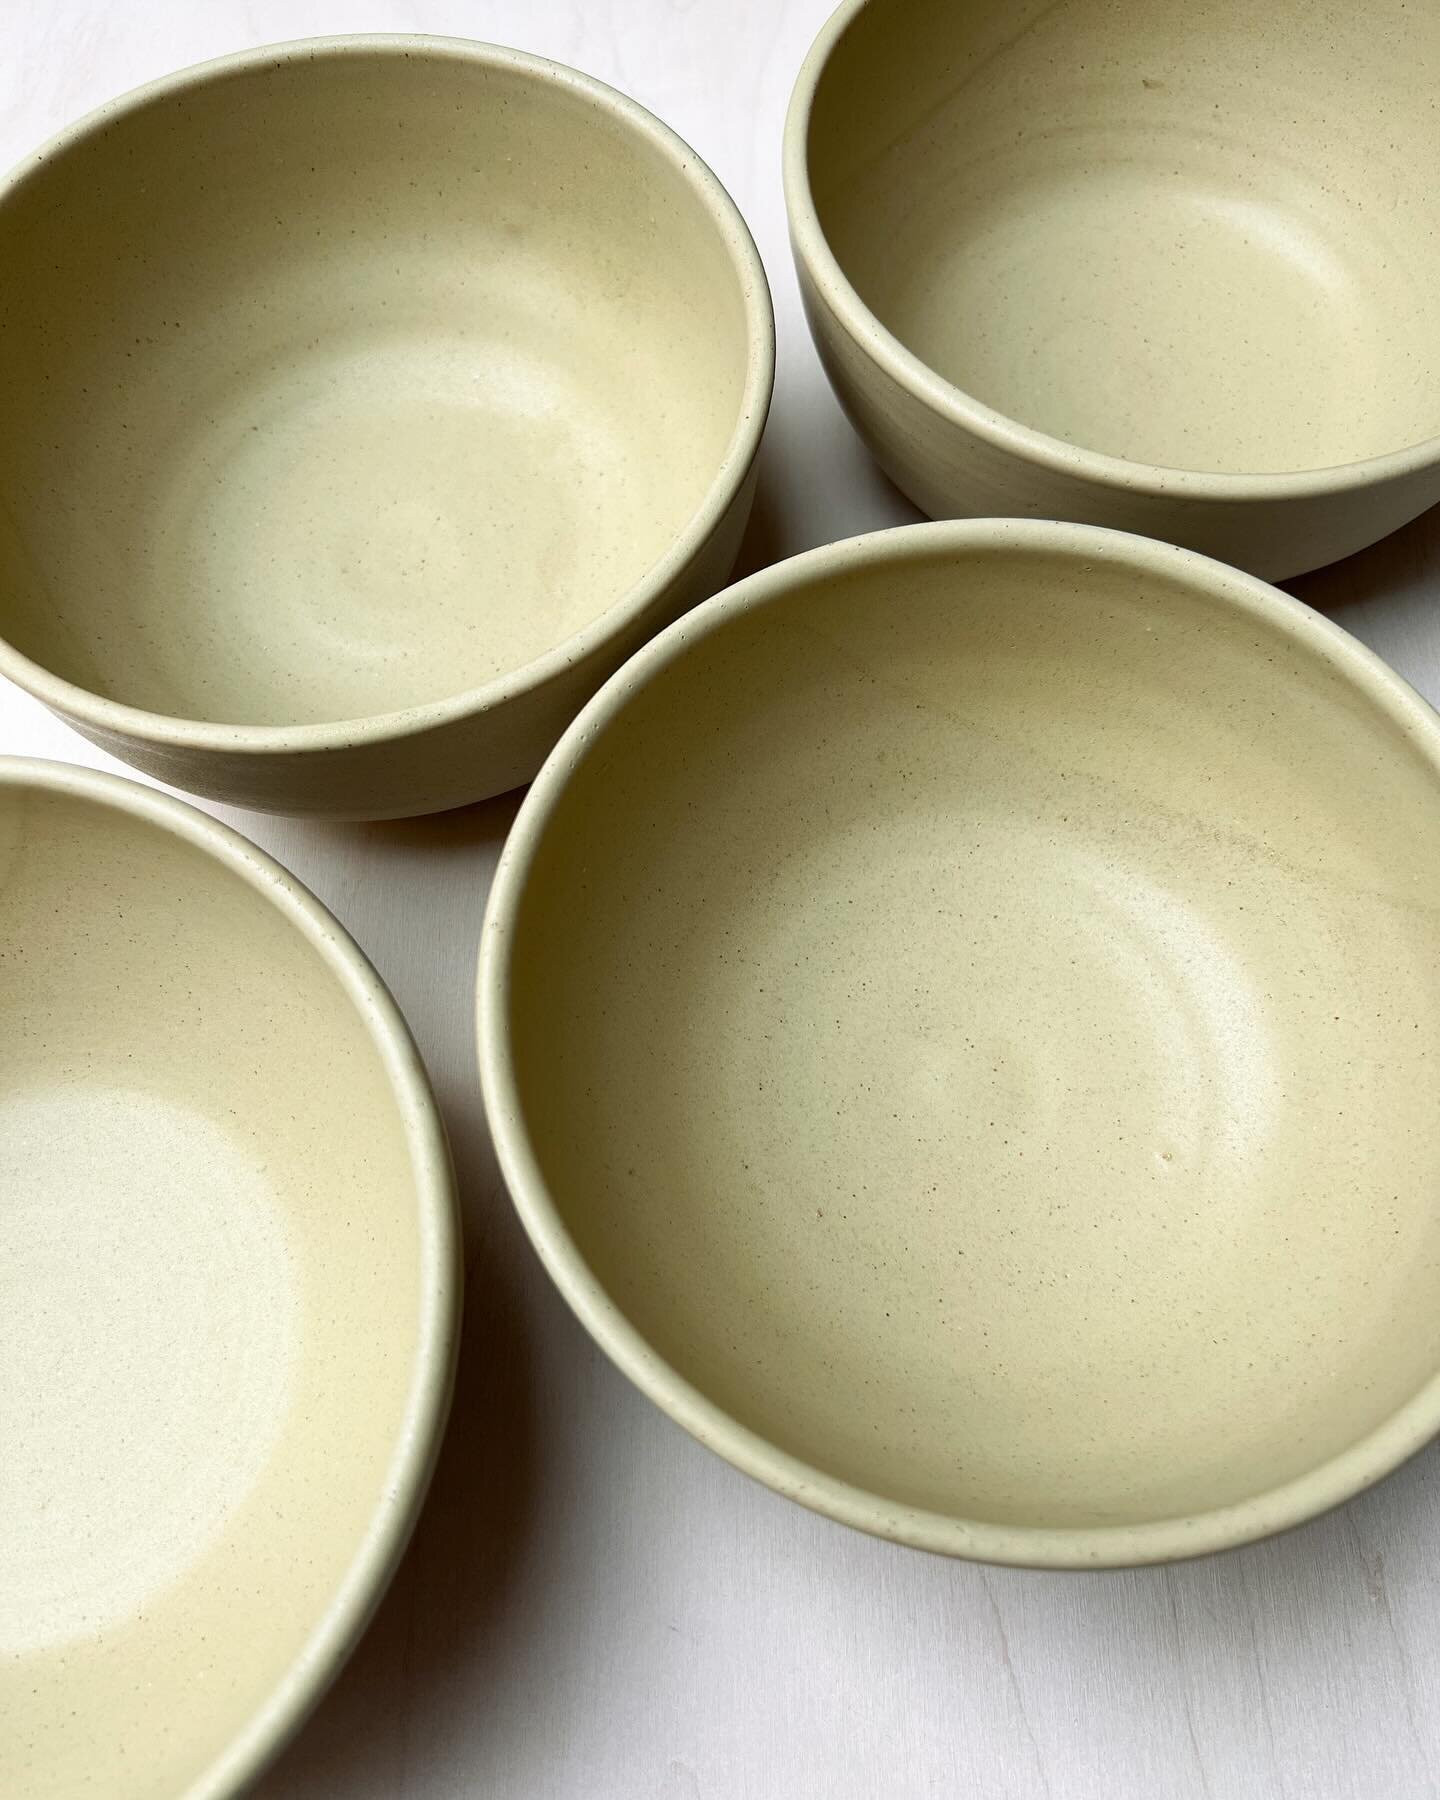 Bowls&hellip;

This bowl commission was for a very special person in my life. She wanted cereal or soup bowls to add to her existing collection in her house by the sea. She says they&rsquo;ve nestled in quite nicely. I&rsquo;m thinking about adding o